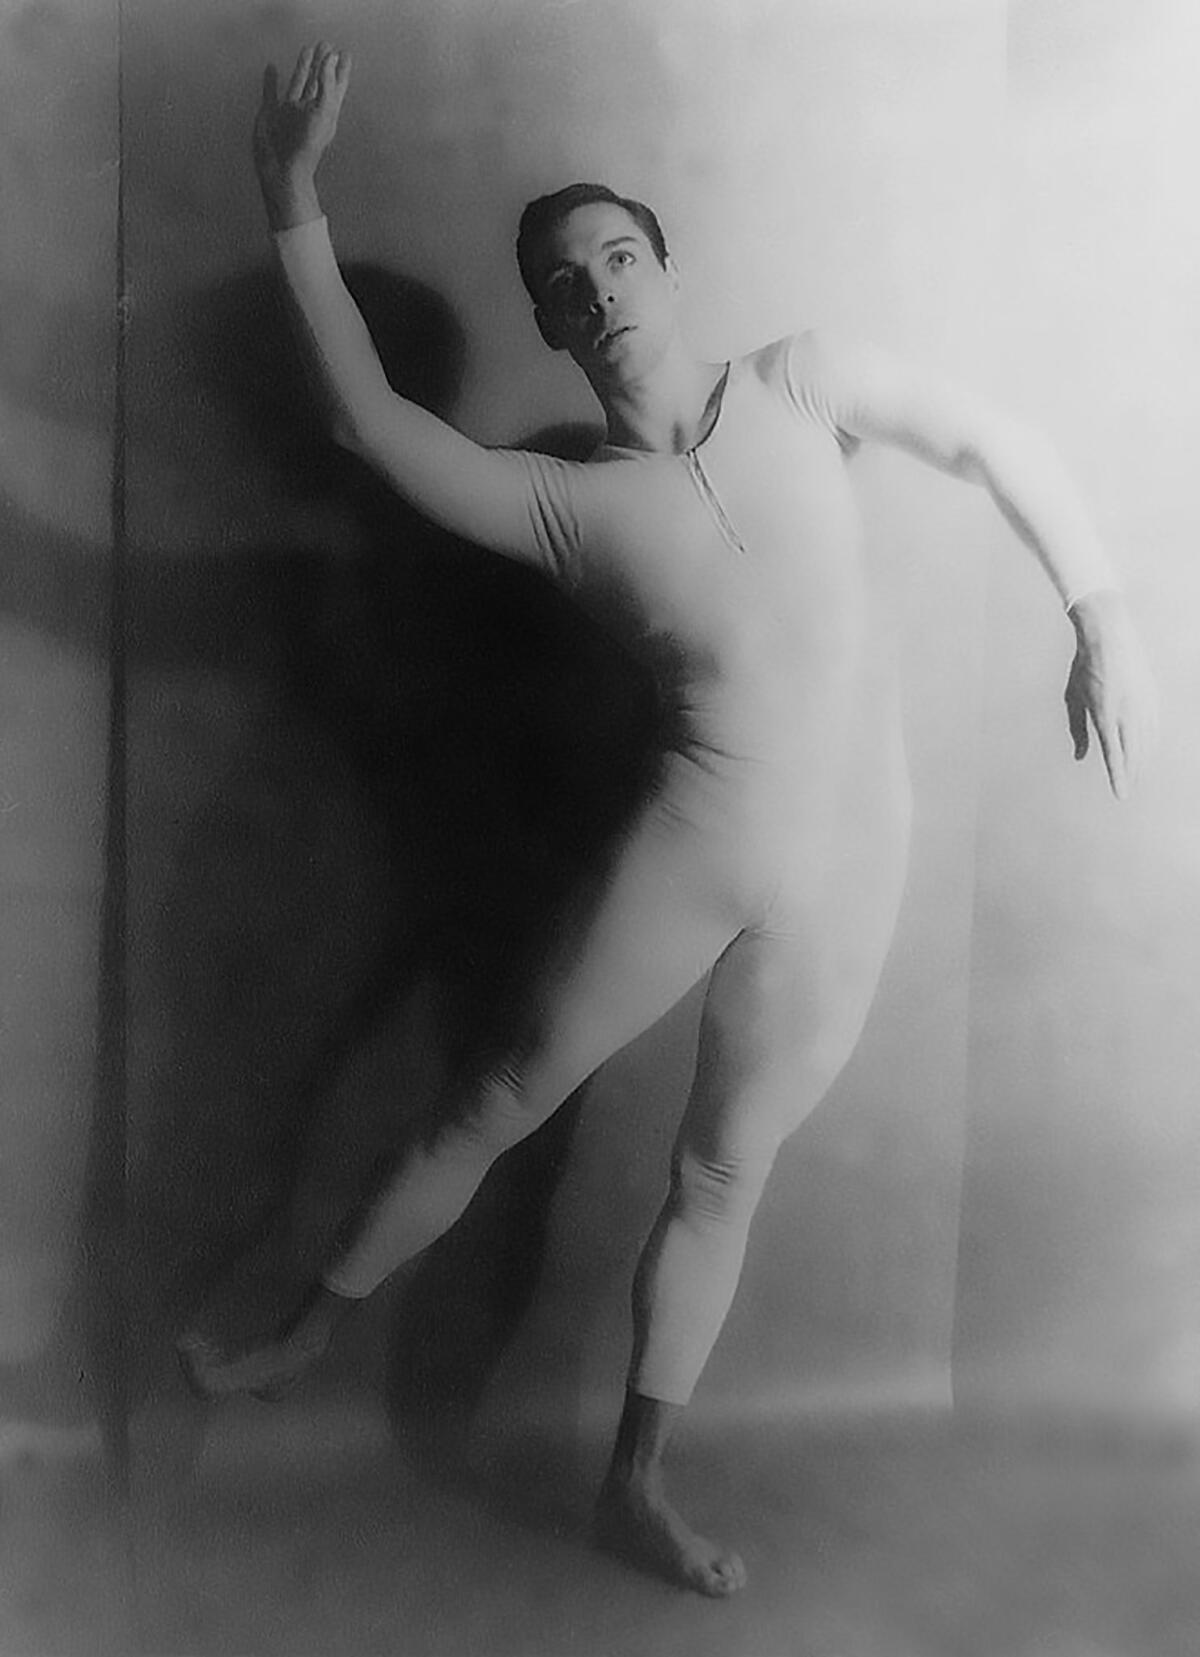 Paul Taylor in 1960 with the New York City Ballet.